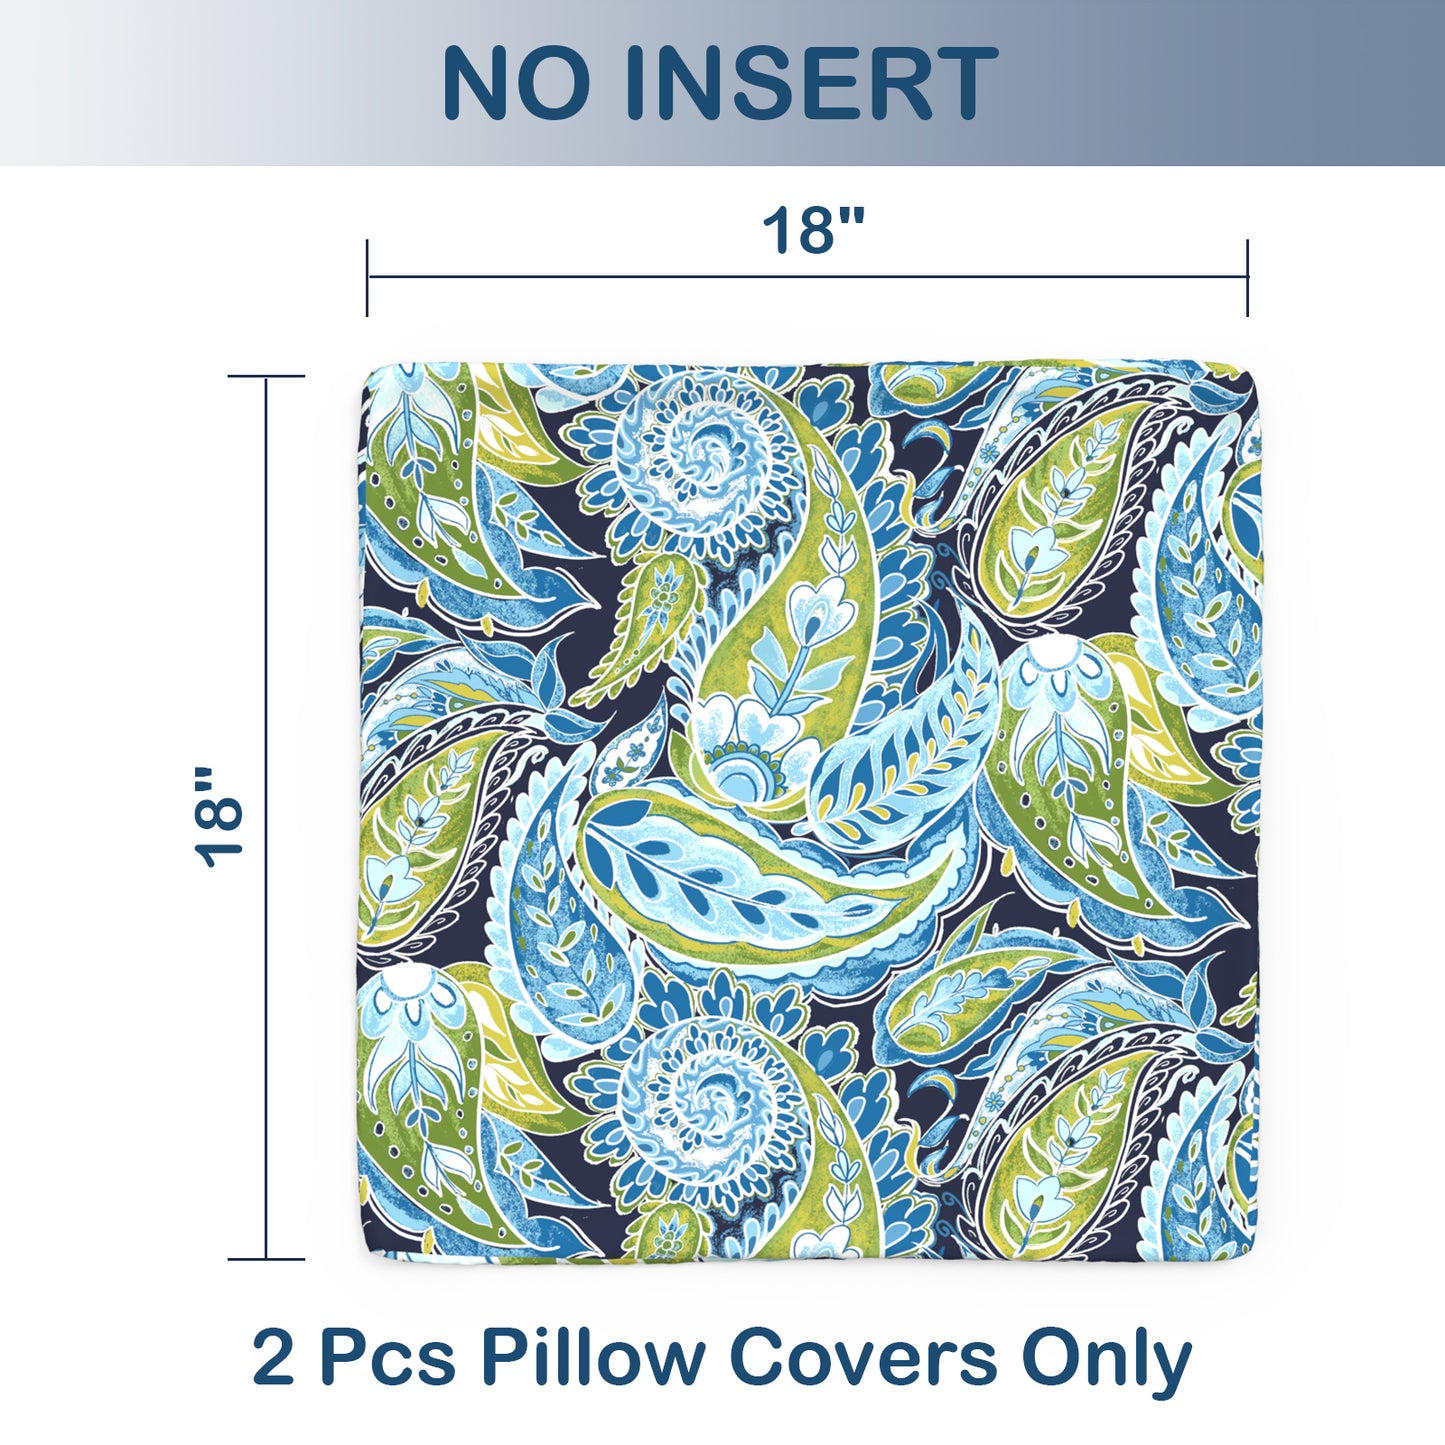 Melody Elephant Outdoor Throw Pillow Covers Pack of 2, Decorative Water Repellent Square Pillow Cases 18x18 Inch, Patio Pillowcases for Home Patio Furniture Use, Paisley Lapis Green